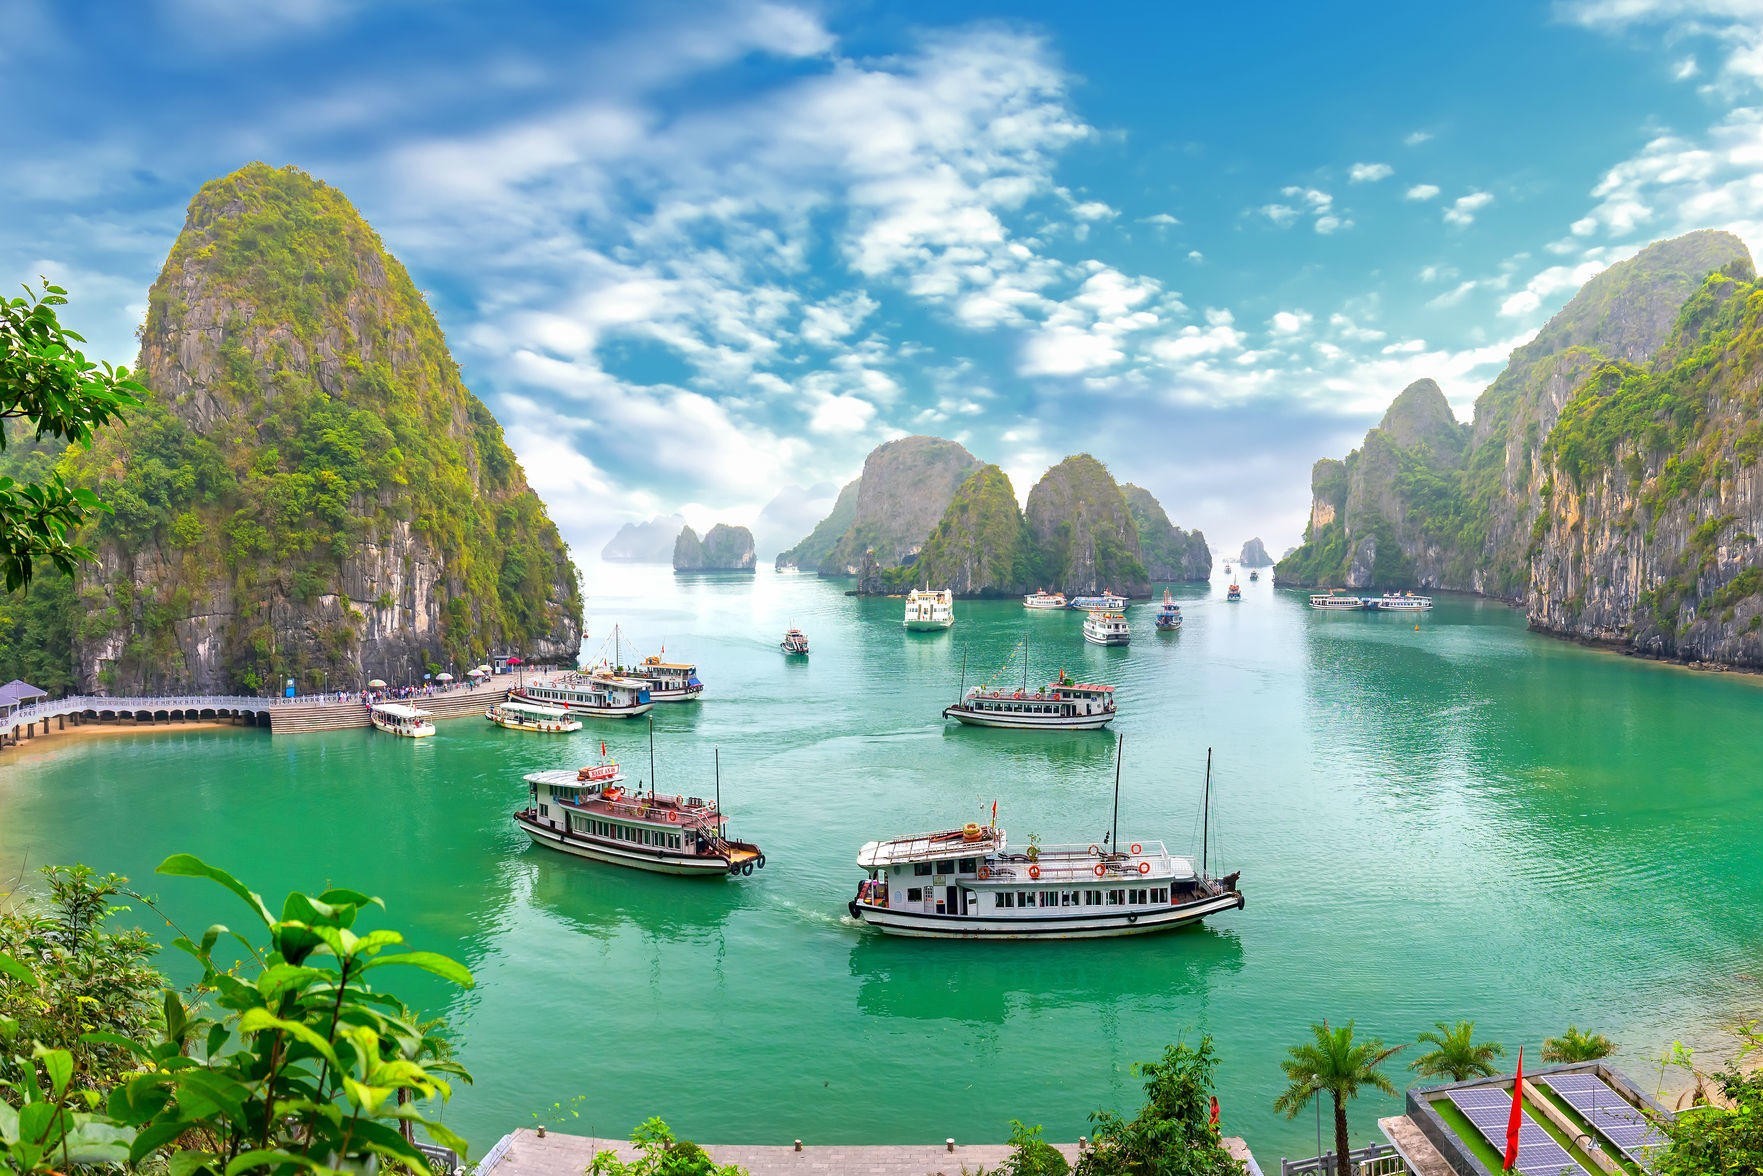 Tour Packages in Vietnam